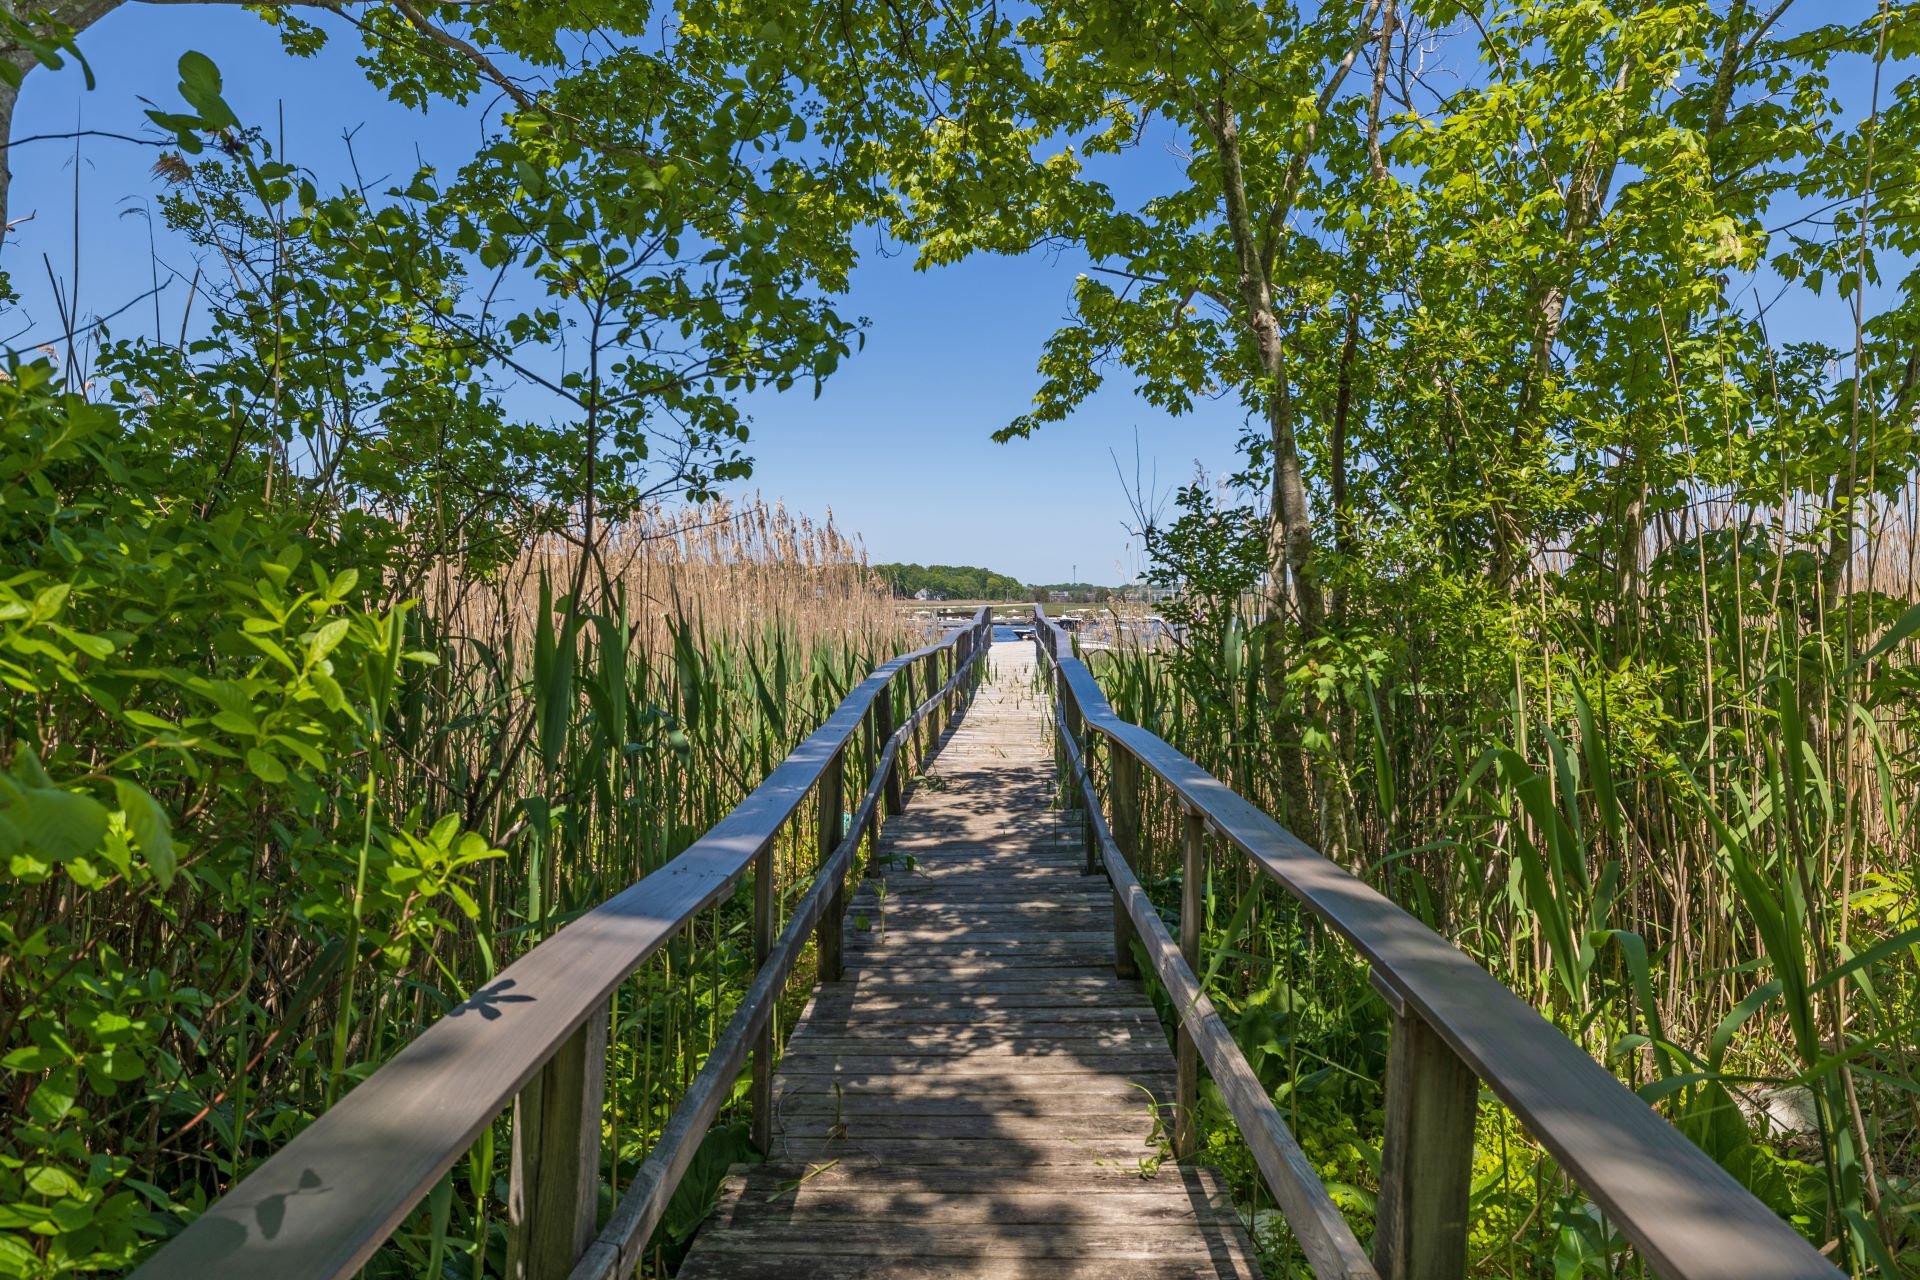 Boardwalk view at North River